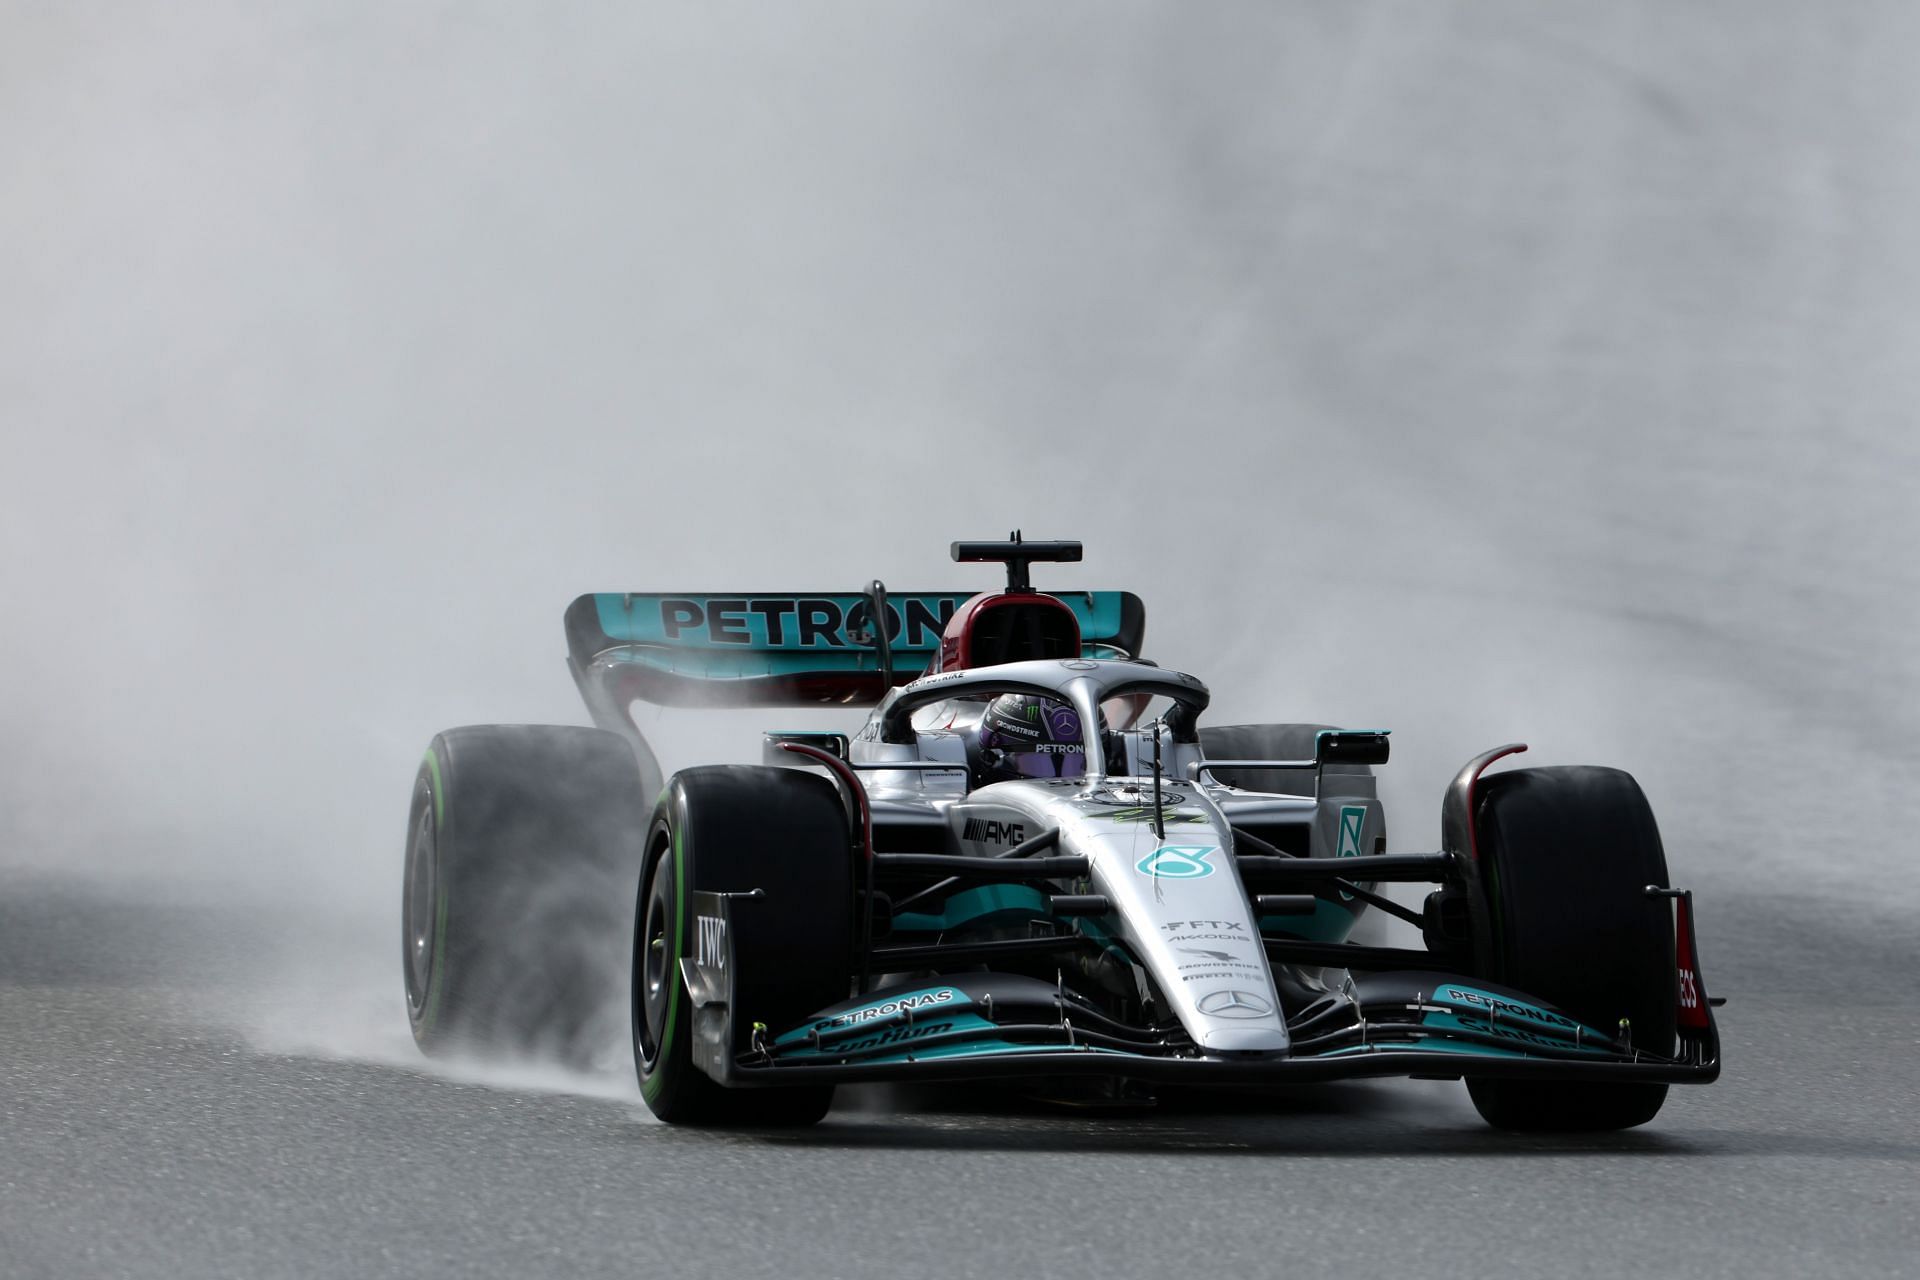 Mercedes might just have found the silver bullet this season